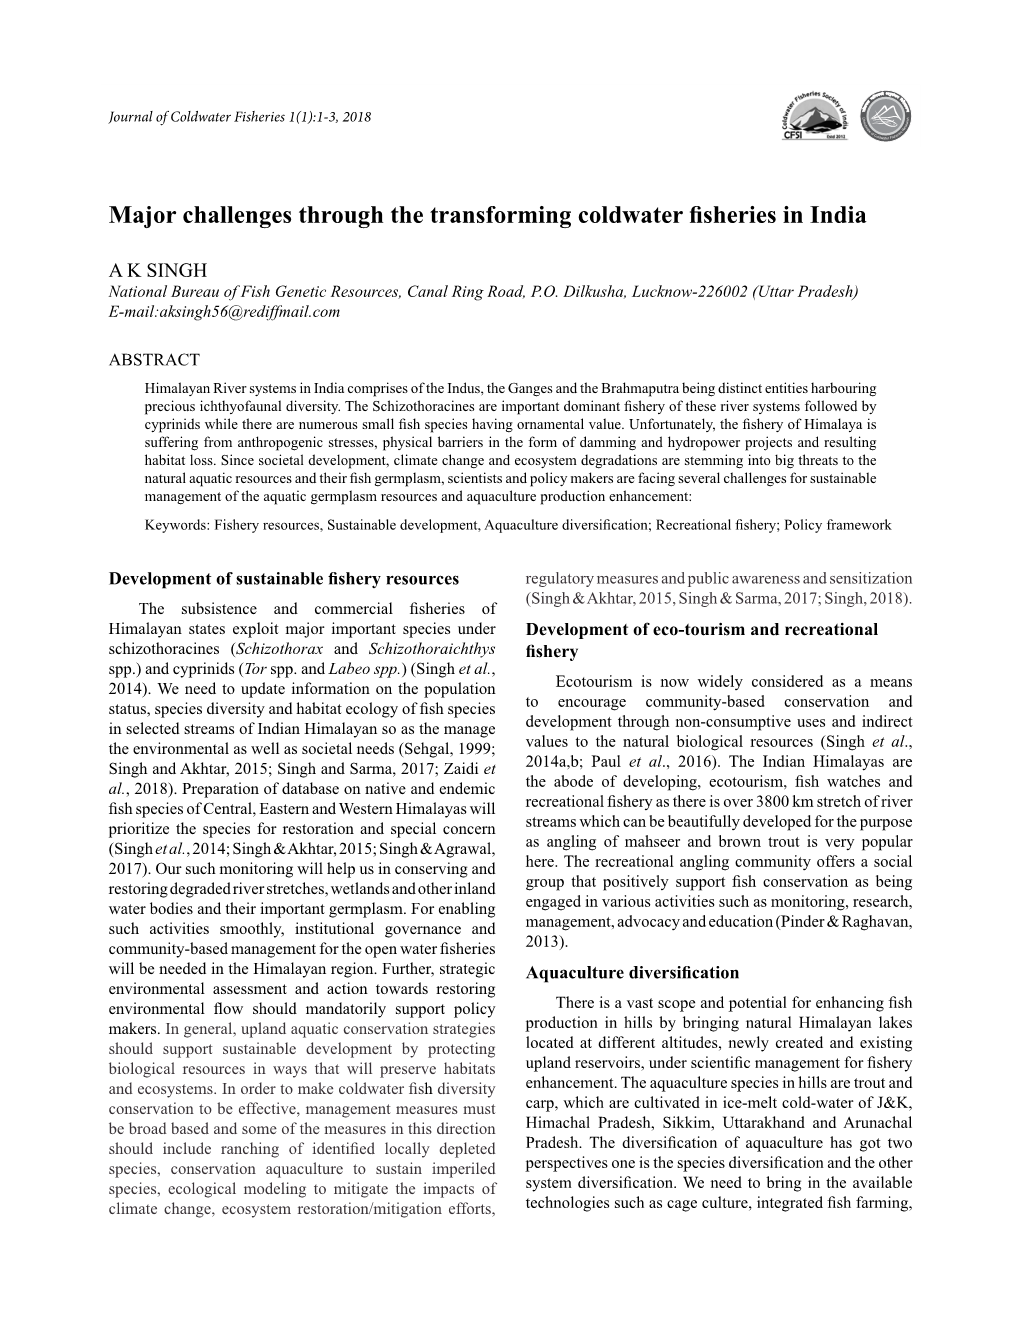 Major Challenges Through the Transforming Coldwater Fisheries in India